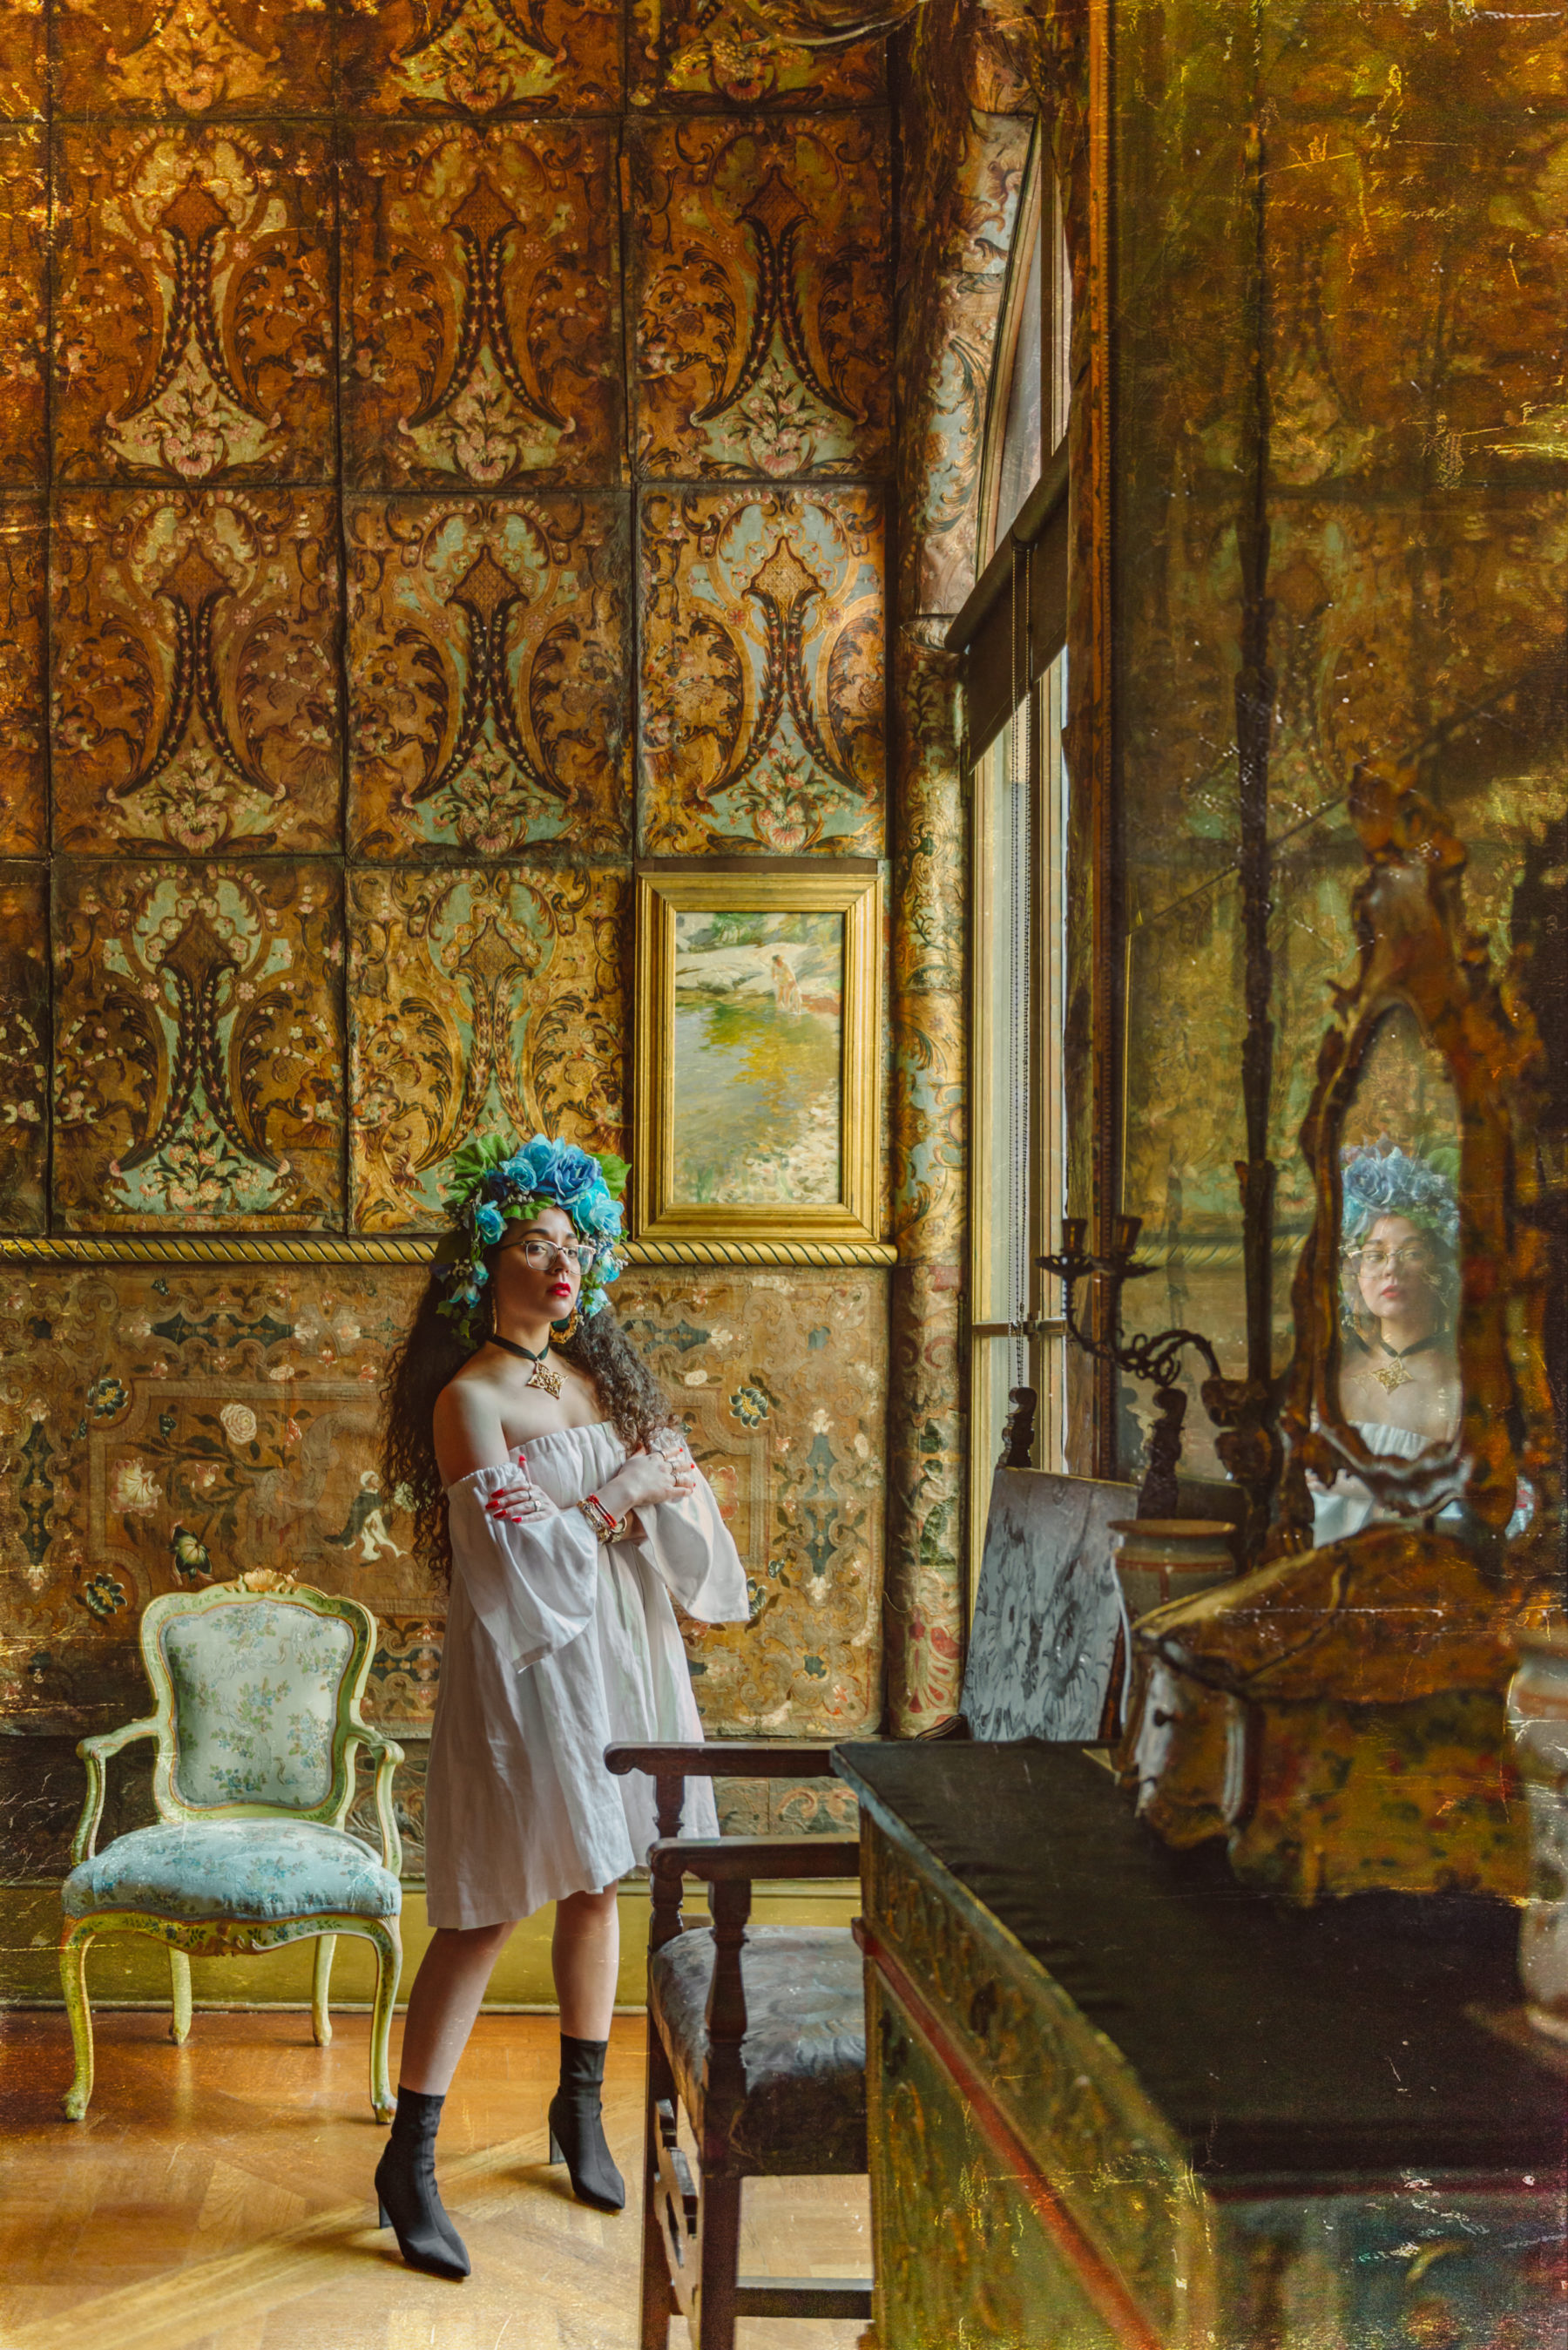 Photo of Paloma in golden room with her image reflected in a mirror